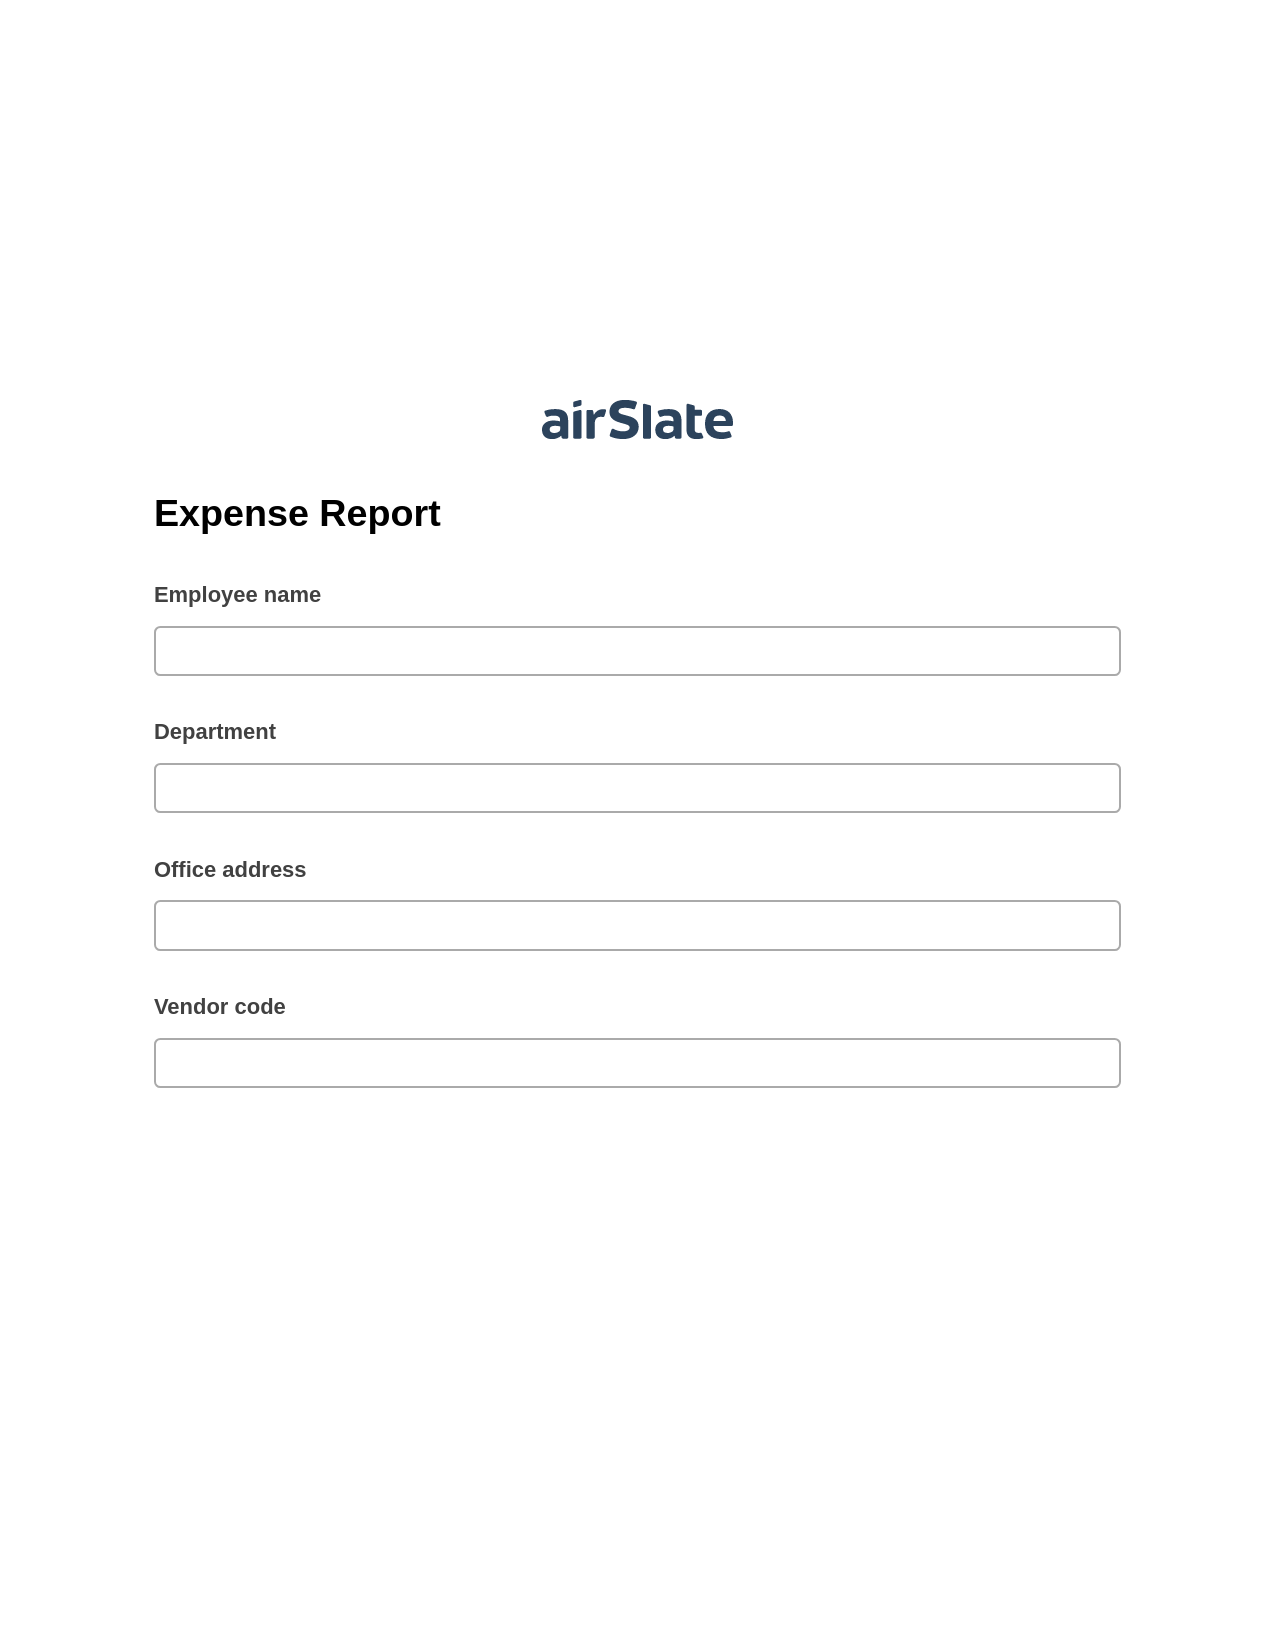 Expense Report Pre-fill from Salesforce Records with SOQL Bot, Unassign Role Bot, Box Bot